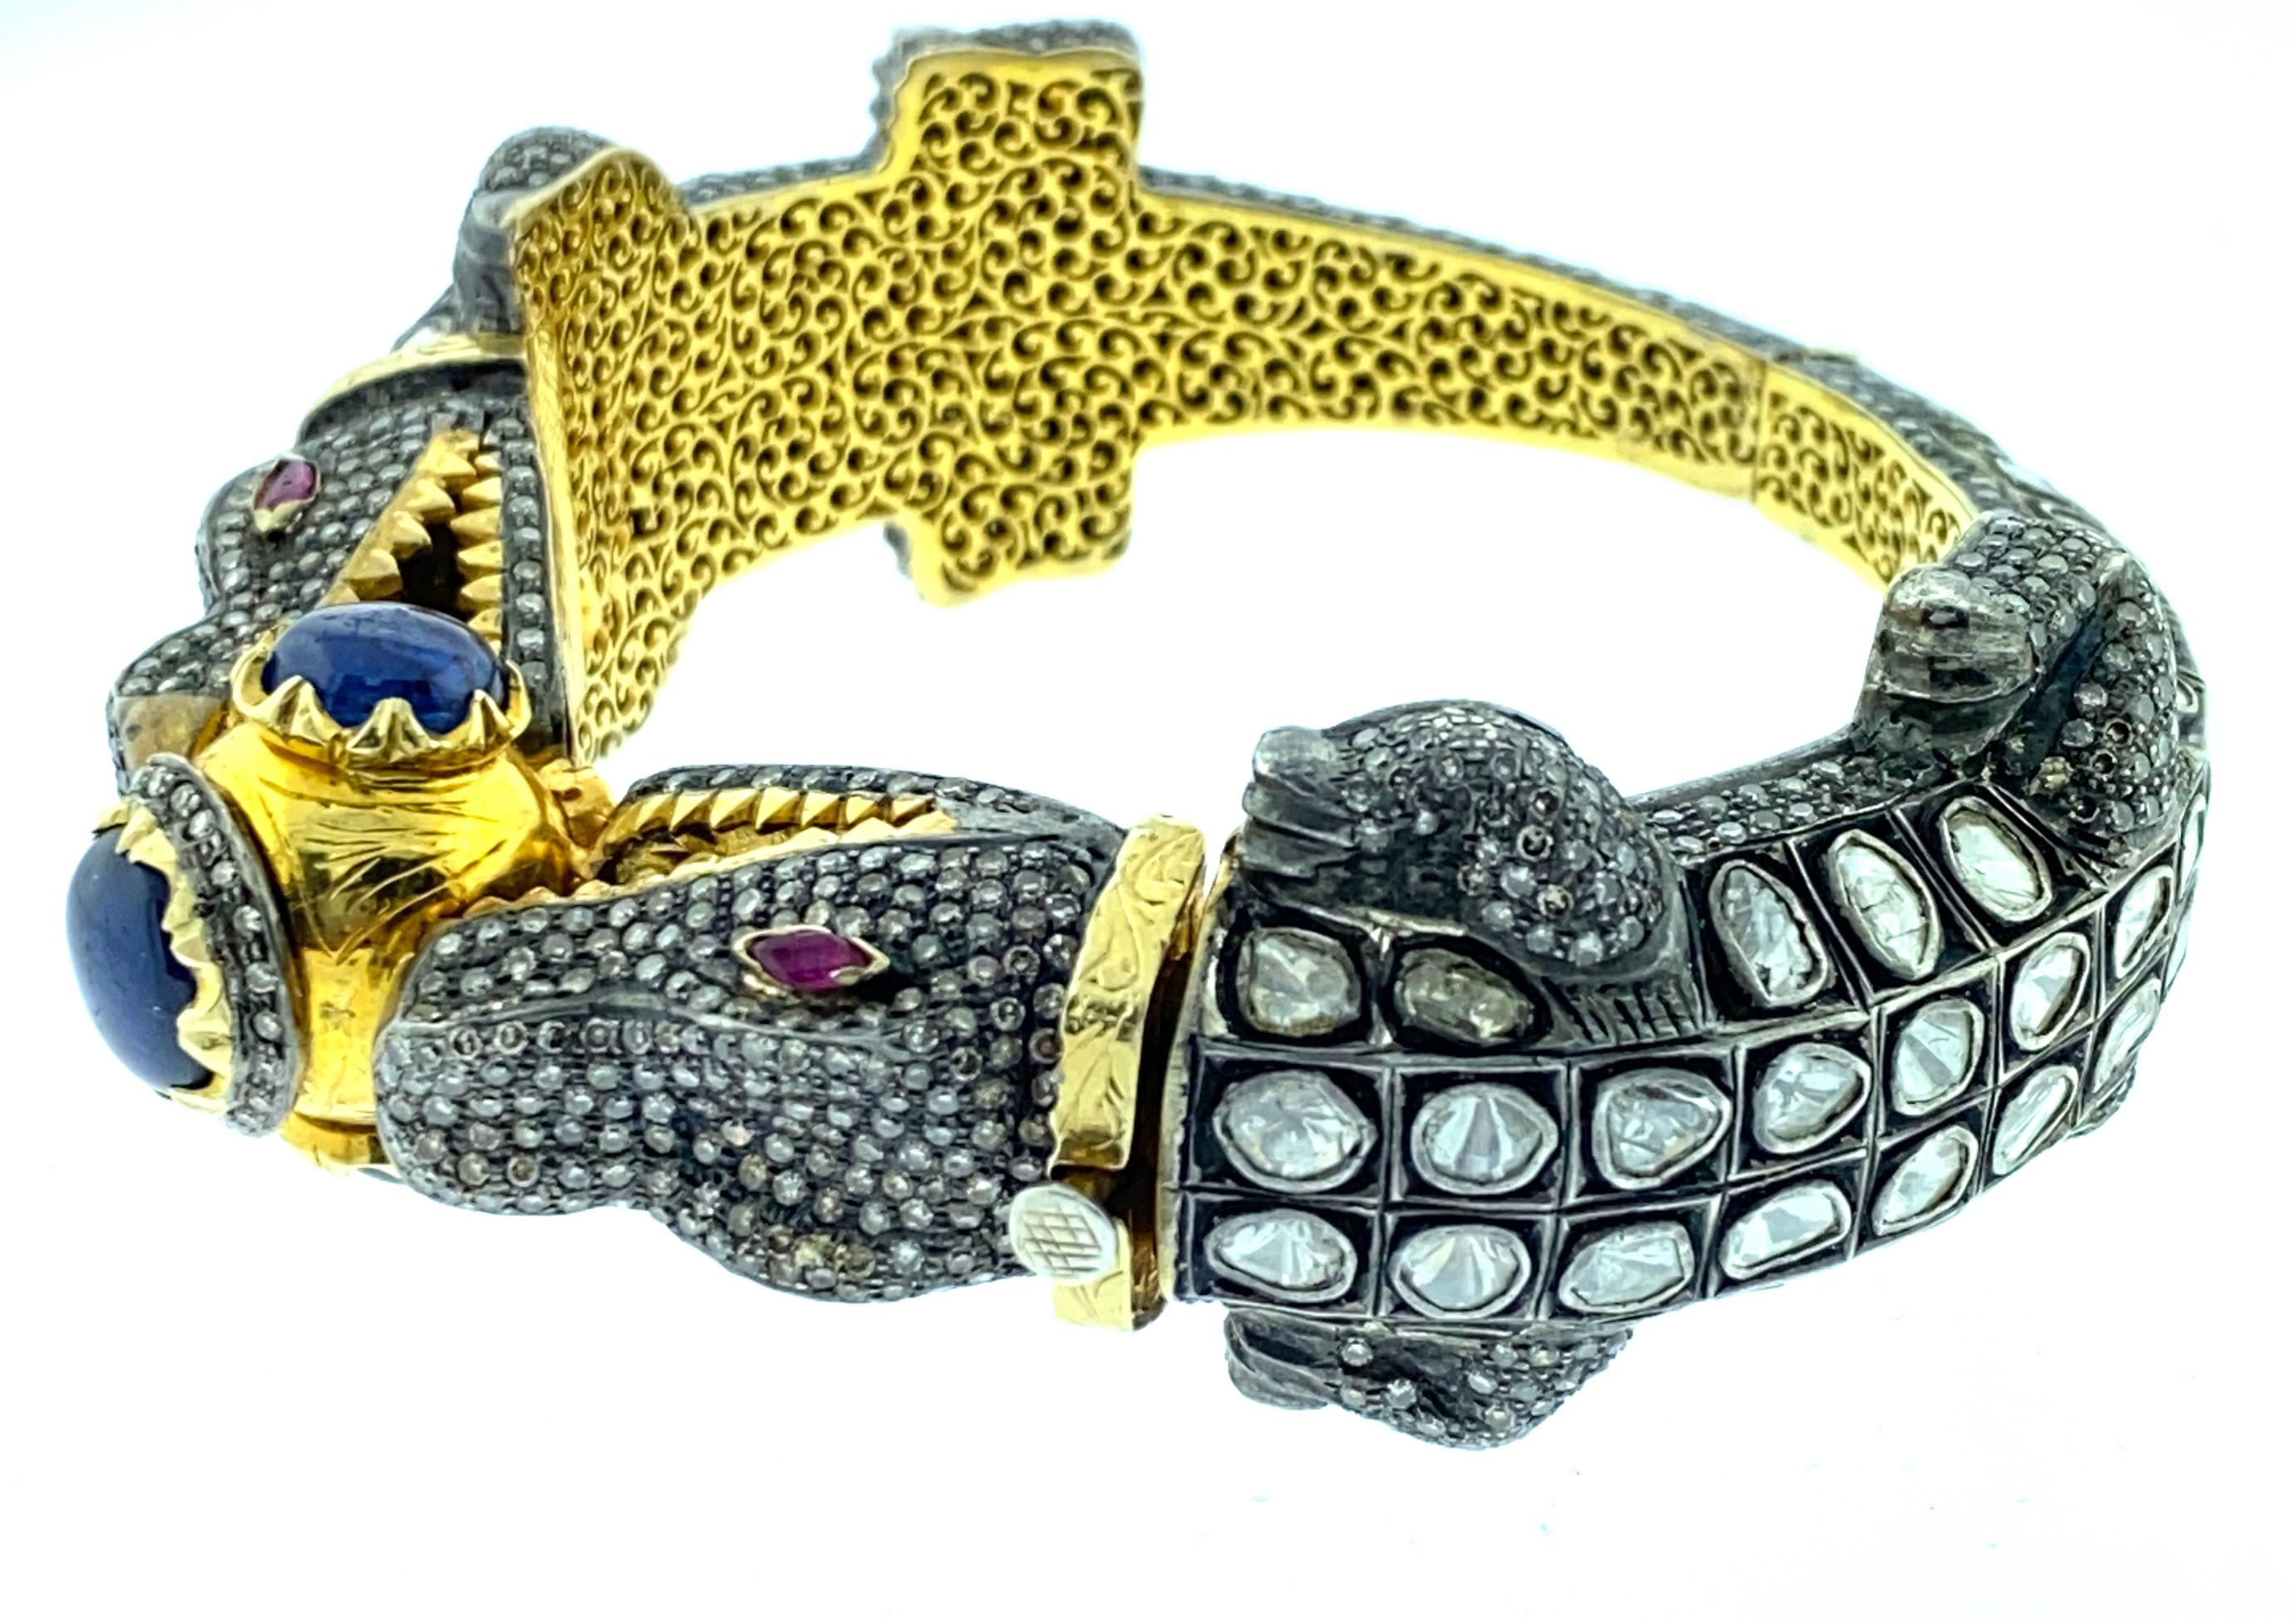 Alligator Polki 13.99ct Diamond 9.24 ct Sapphire Bangle set in Oxidized Sterling Silver and pure 14K Gold. The inside of the bangle is pure 14K Gold which is finely crafted and carved by hand. The saftey of the bangle is a secure 14K Gold safety.